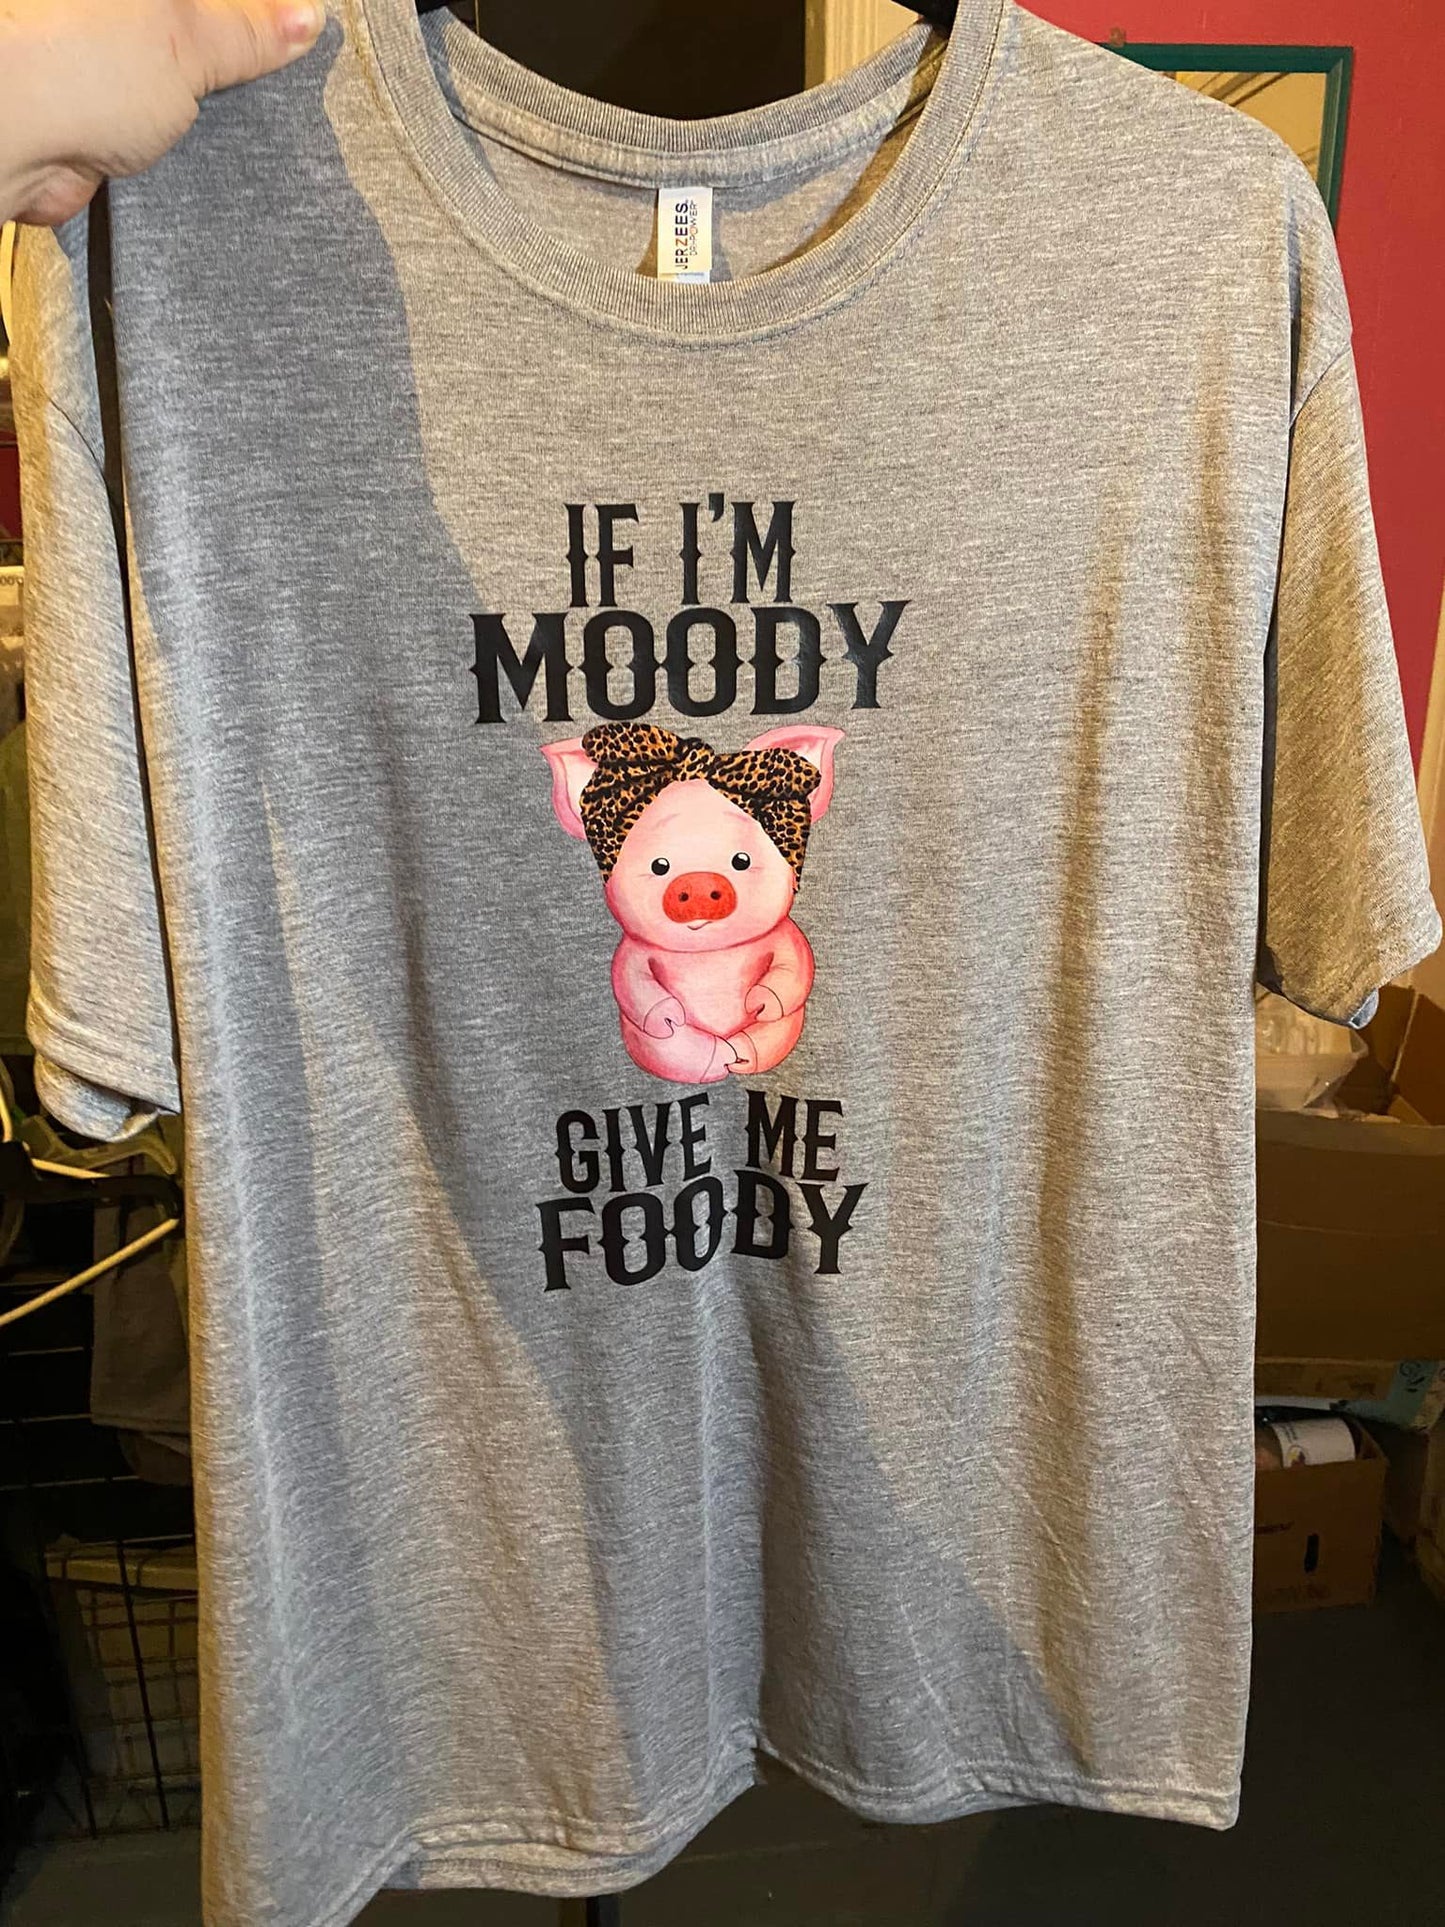 IF IM MOODY GIVE ME FOODY T-SHIRT